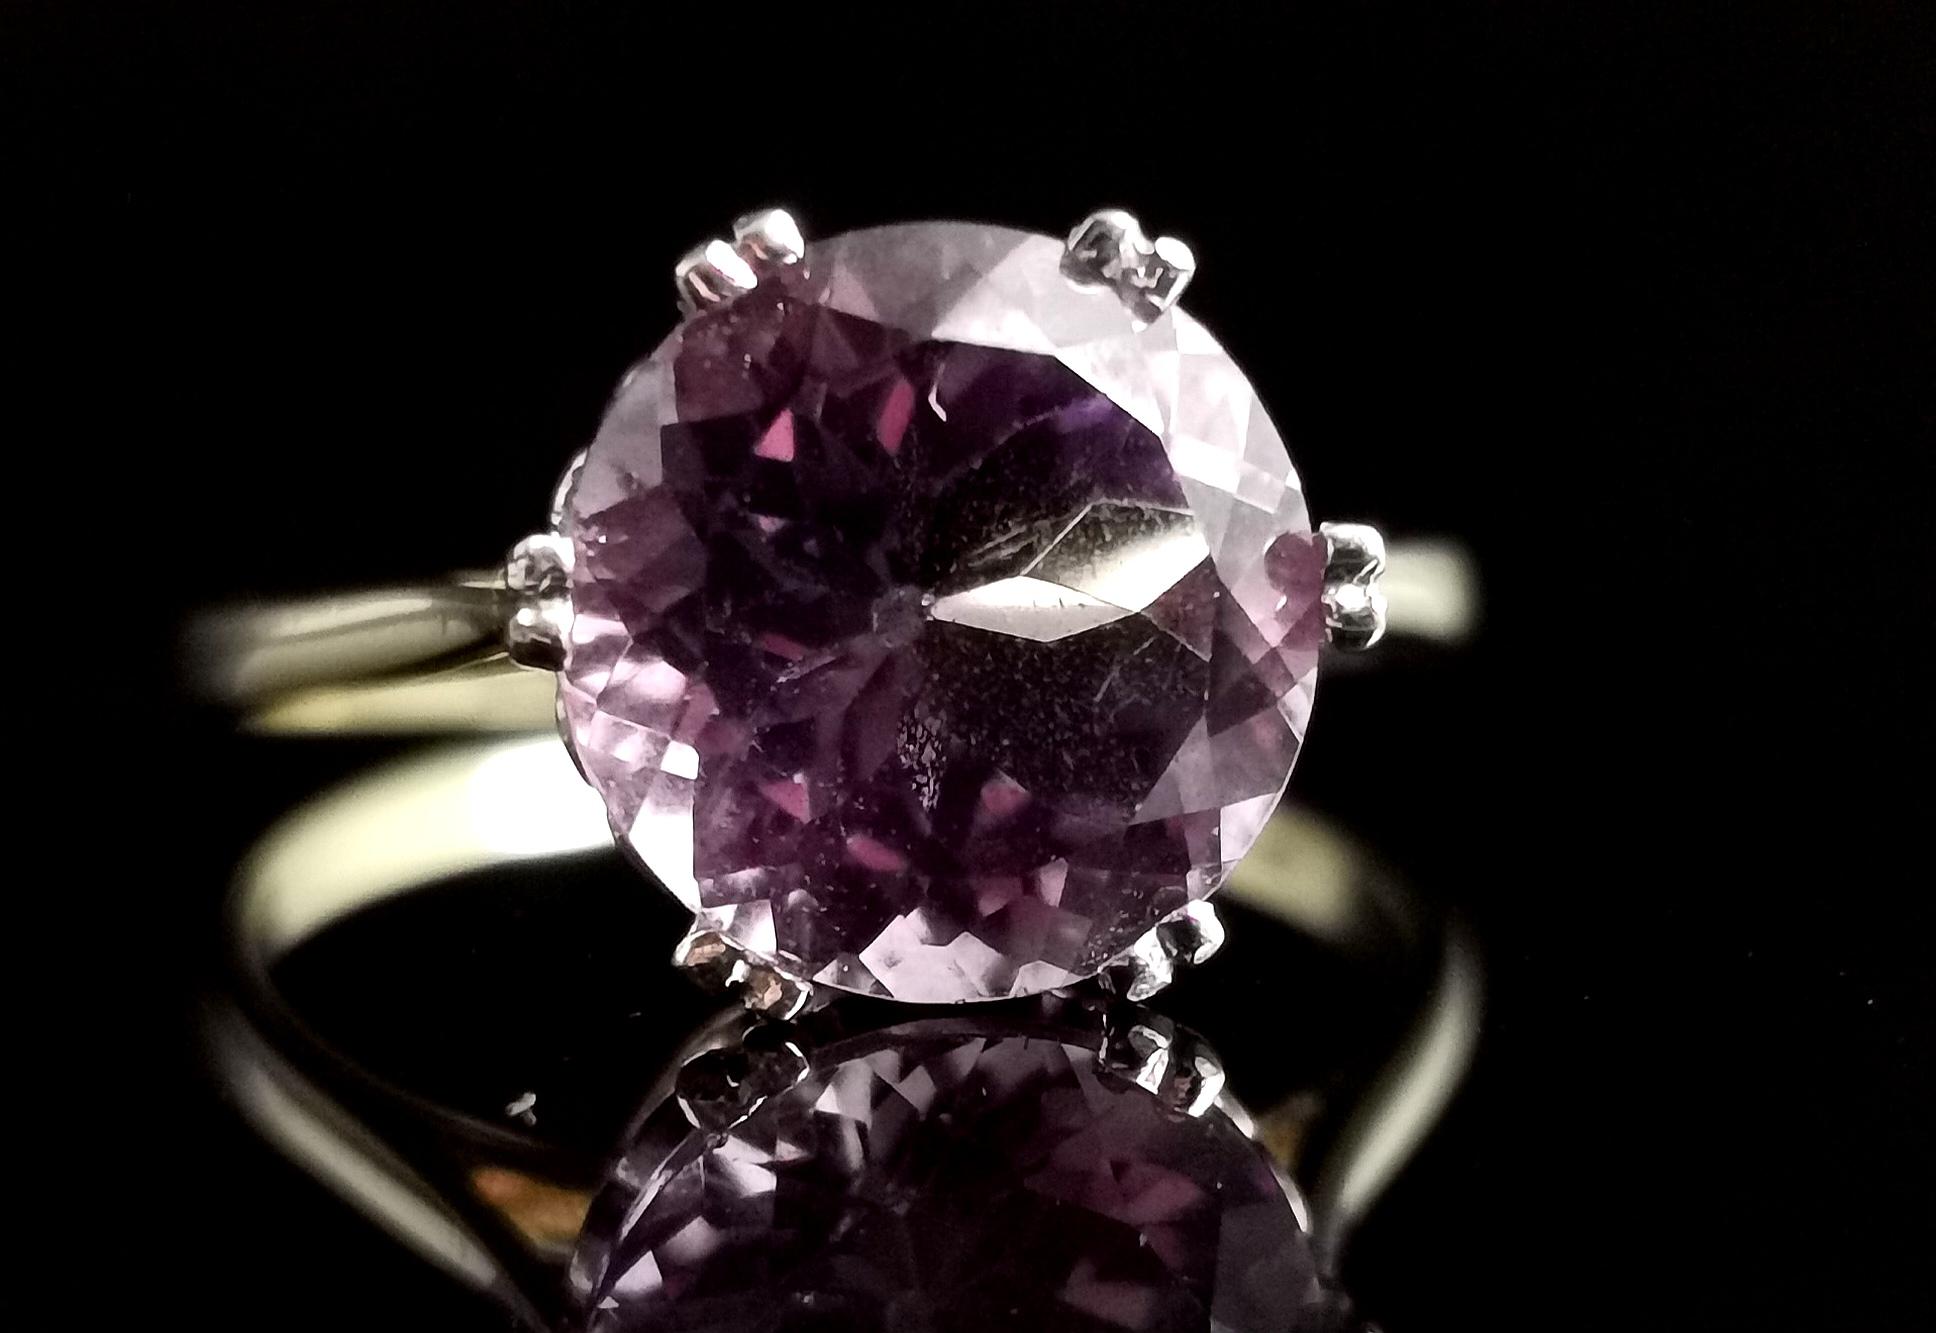 A Gorgeous vintage Amethyst cocktail ring.

A beautiful mid to deep purple round cut Amethyst with approx 3ct weight, it is the stone that steals the show on this ring and it has a high profile from the finger.

It has a smooth 9kt yellow gold band